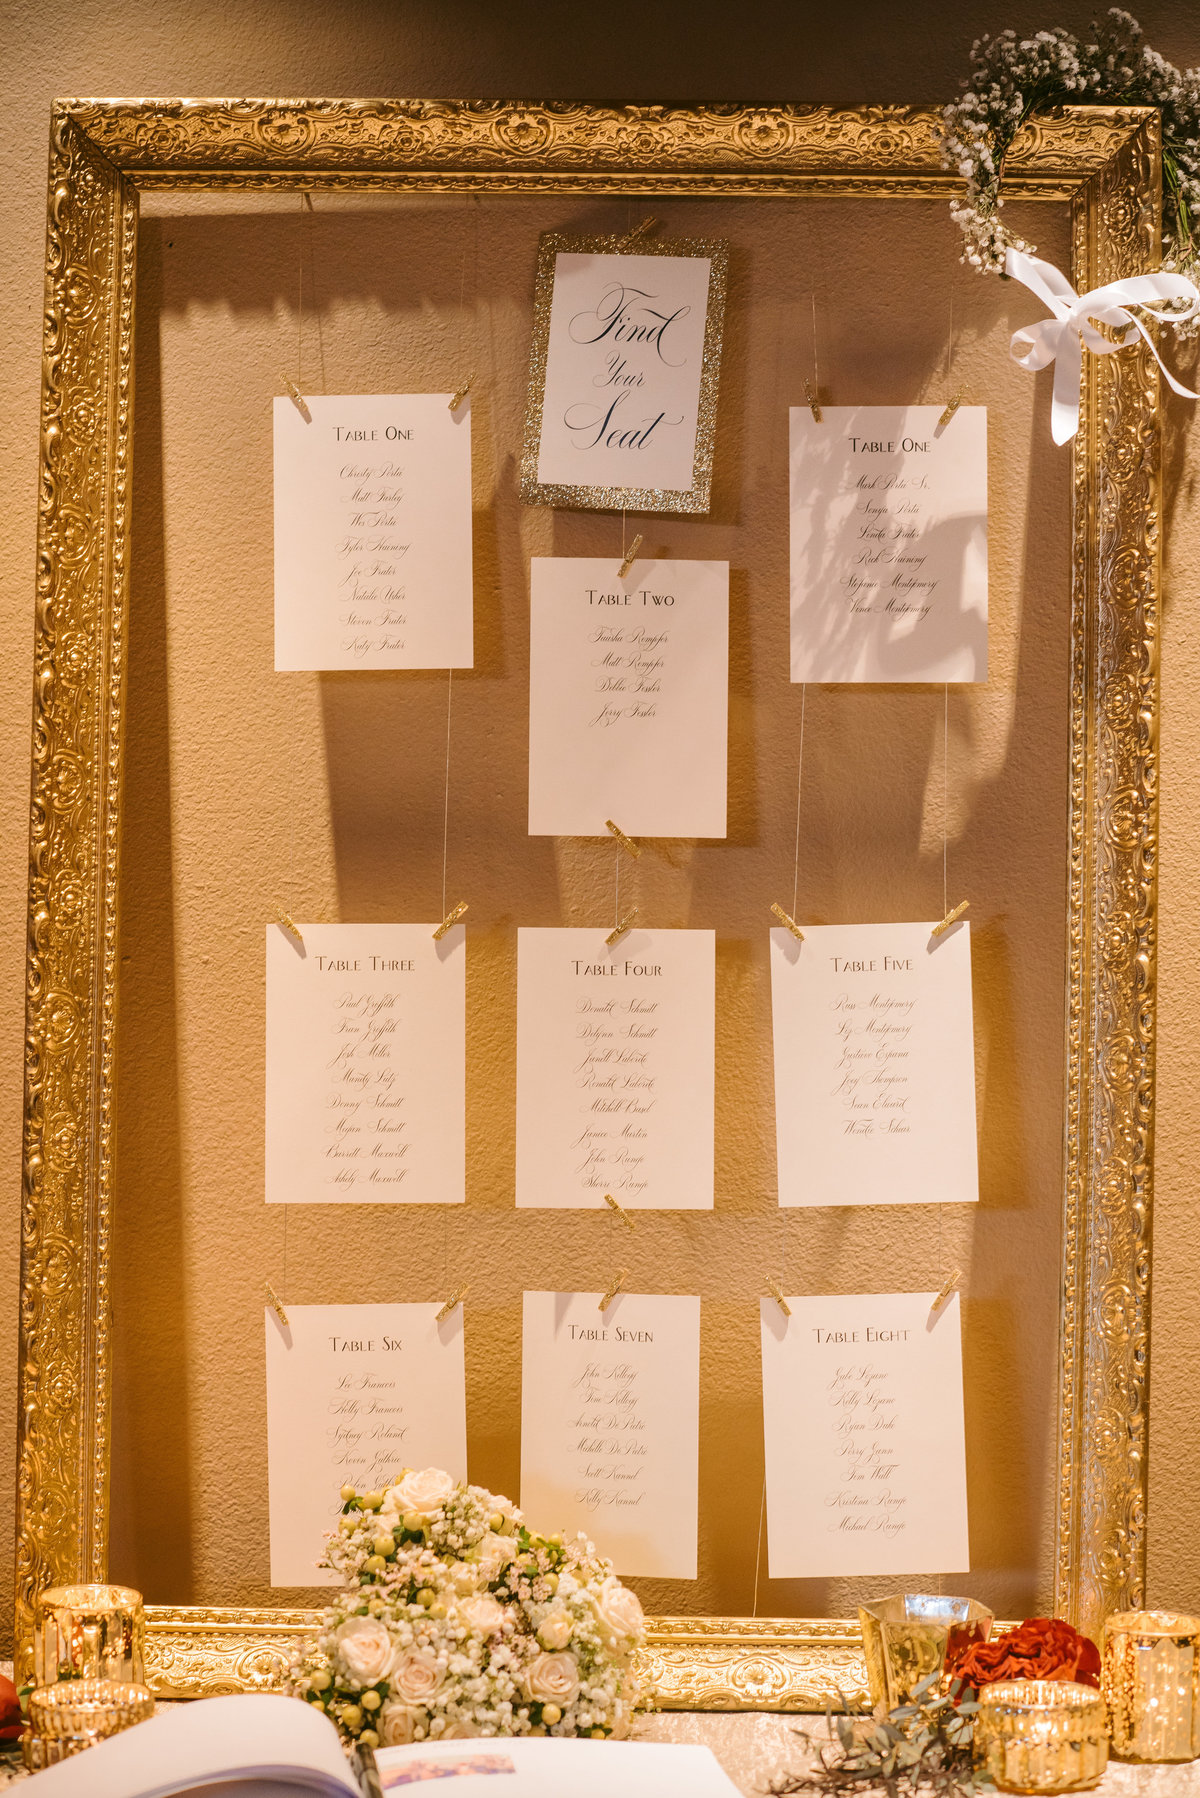 Lake Tahoe Wedding Planners gold frame seating chart at venue The Resort at Squaw Creek, Lake Tahoe, Joy of Life Events image by Charleston Churchill